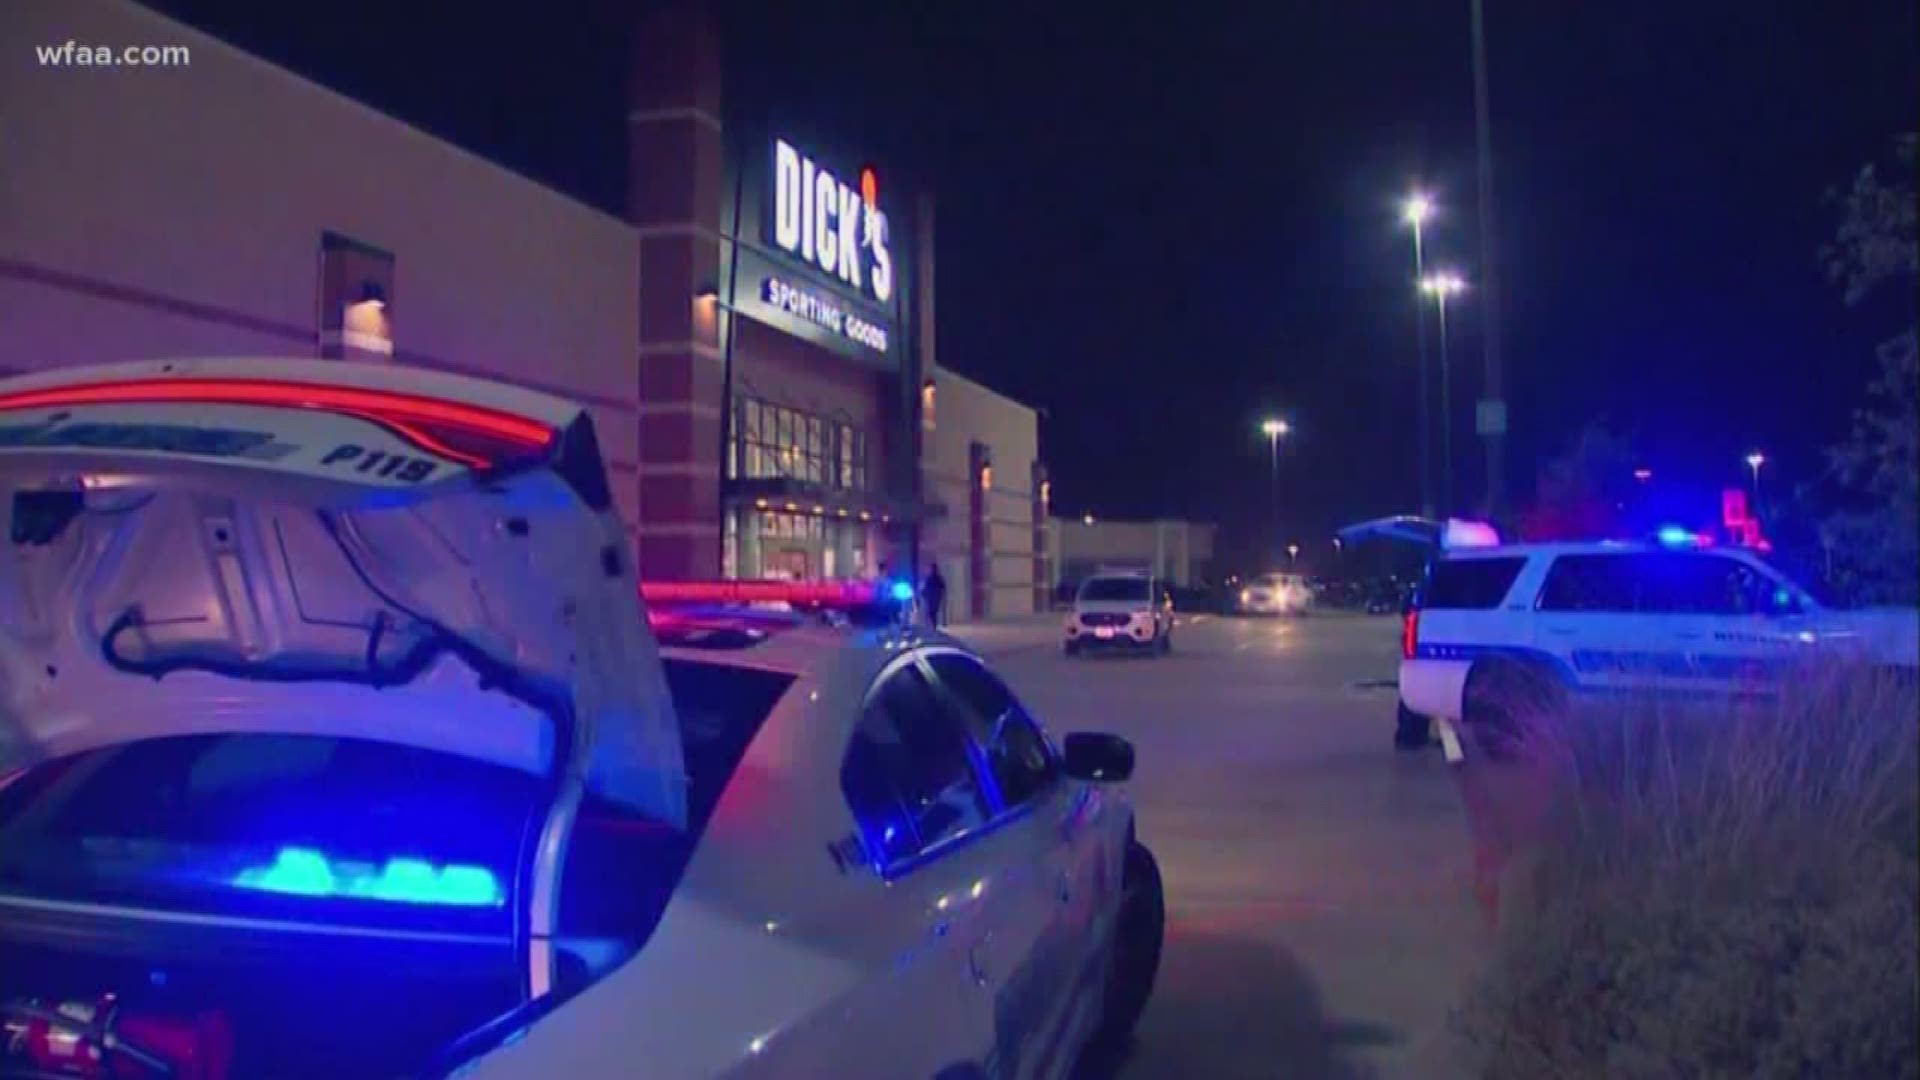 Teen charged in Northpark Mall shooting 